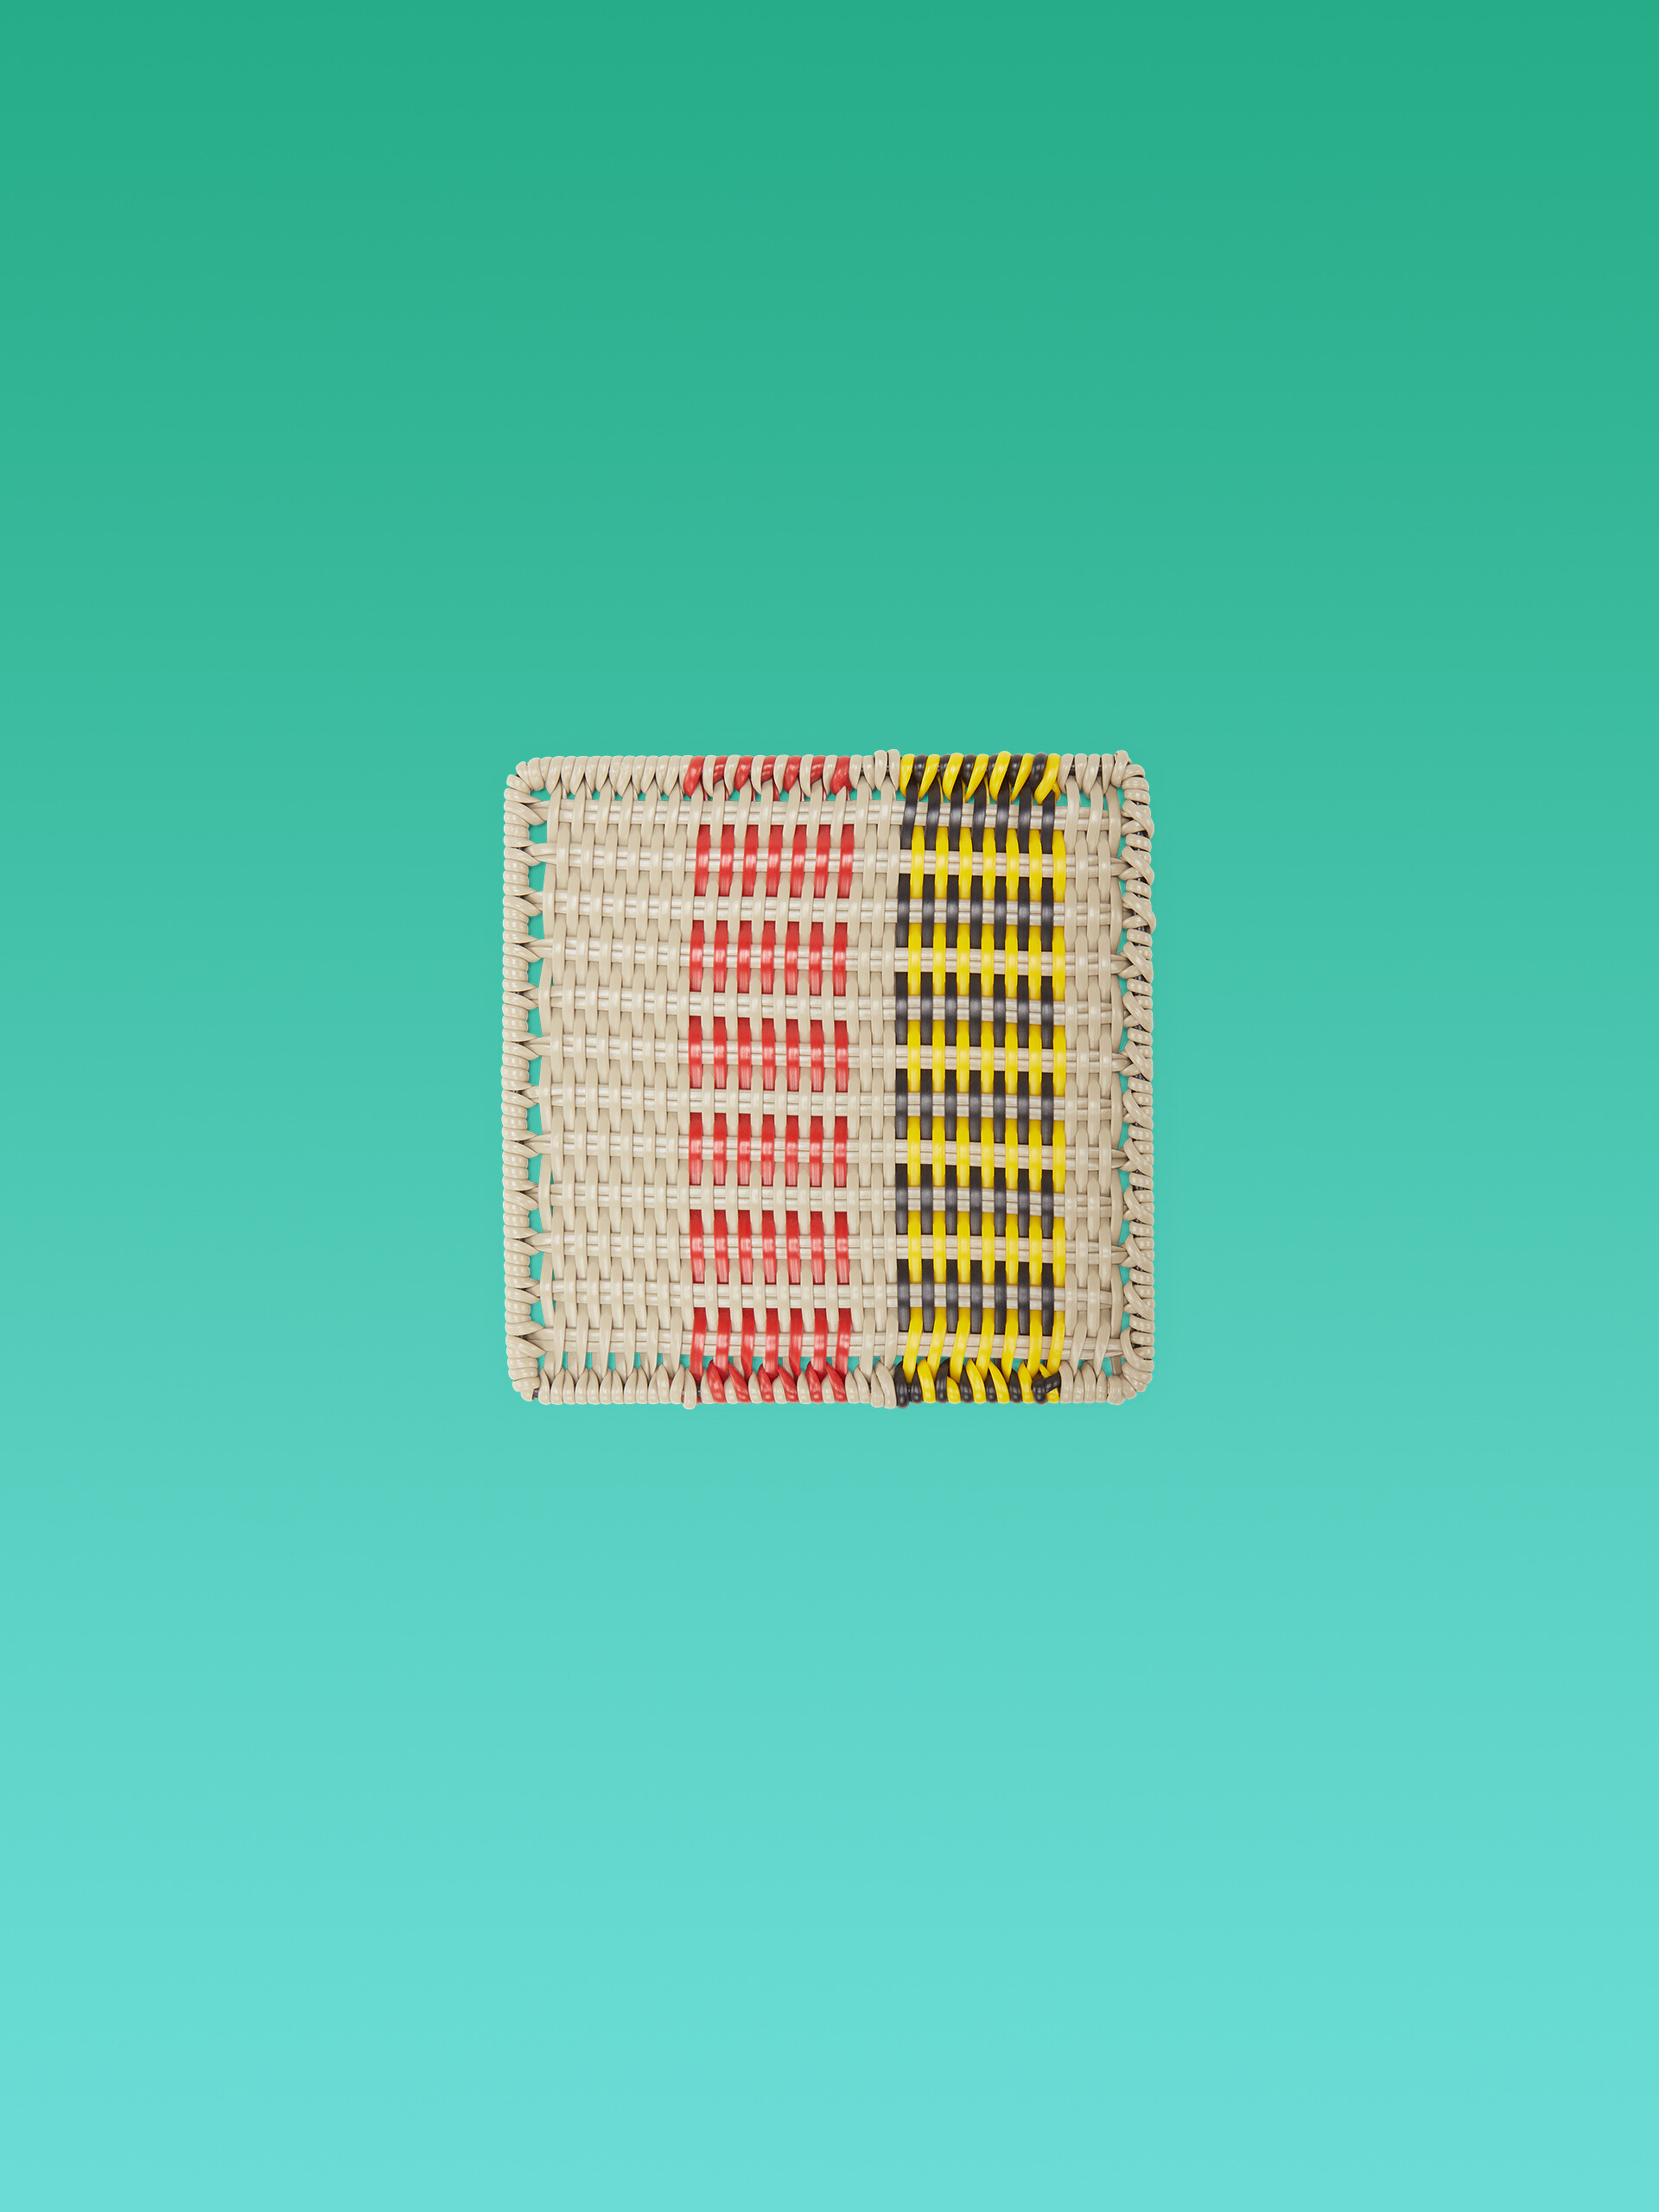 MARNI MARKET square mat with striped motif in iron and yellow, black, red and beige woven PVC - Home Accessories - Image 1